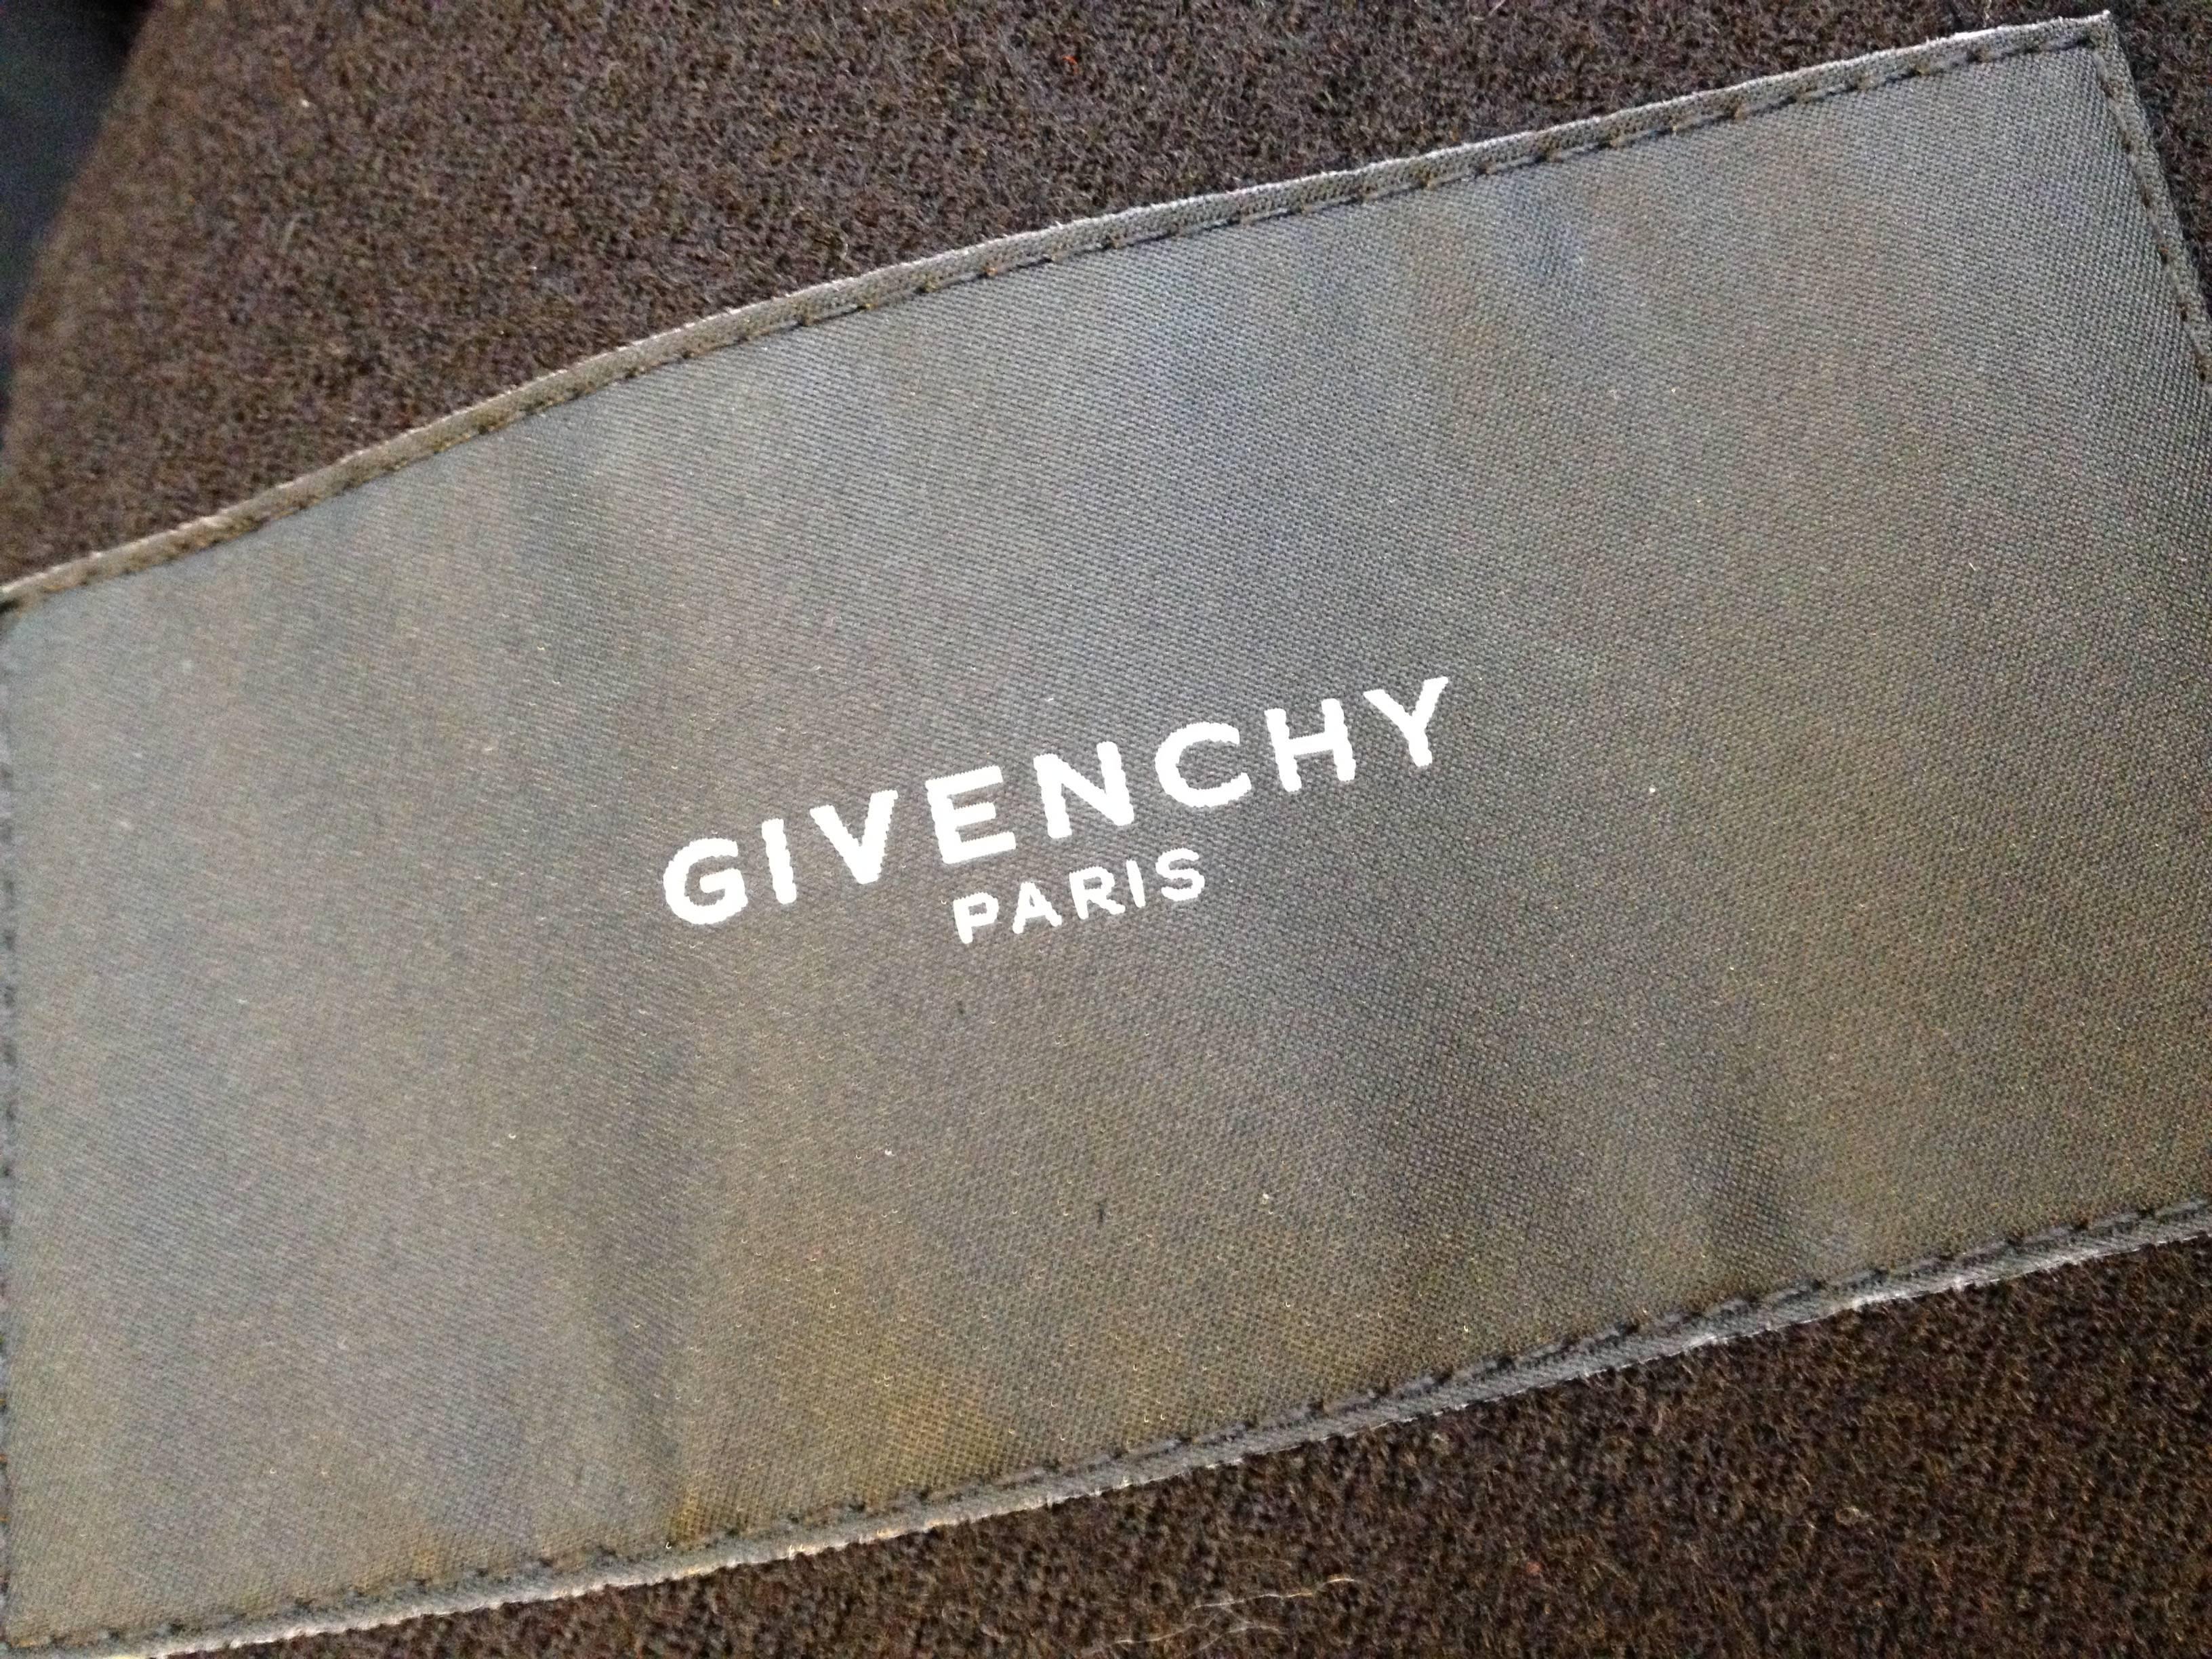 Givenchy Red Runway Jacket Black Star Embellishment Fall-Winter 2012-2013 Sz 38 For Sale 4